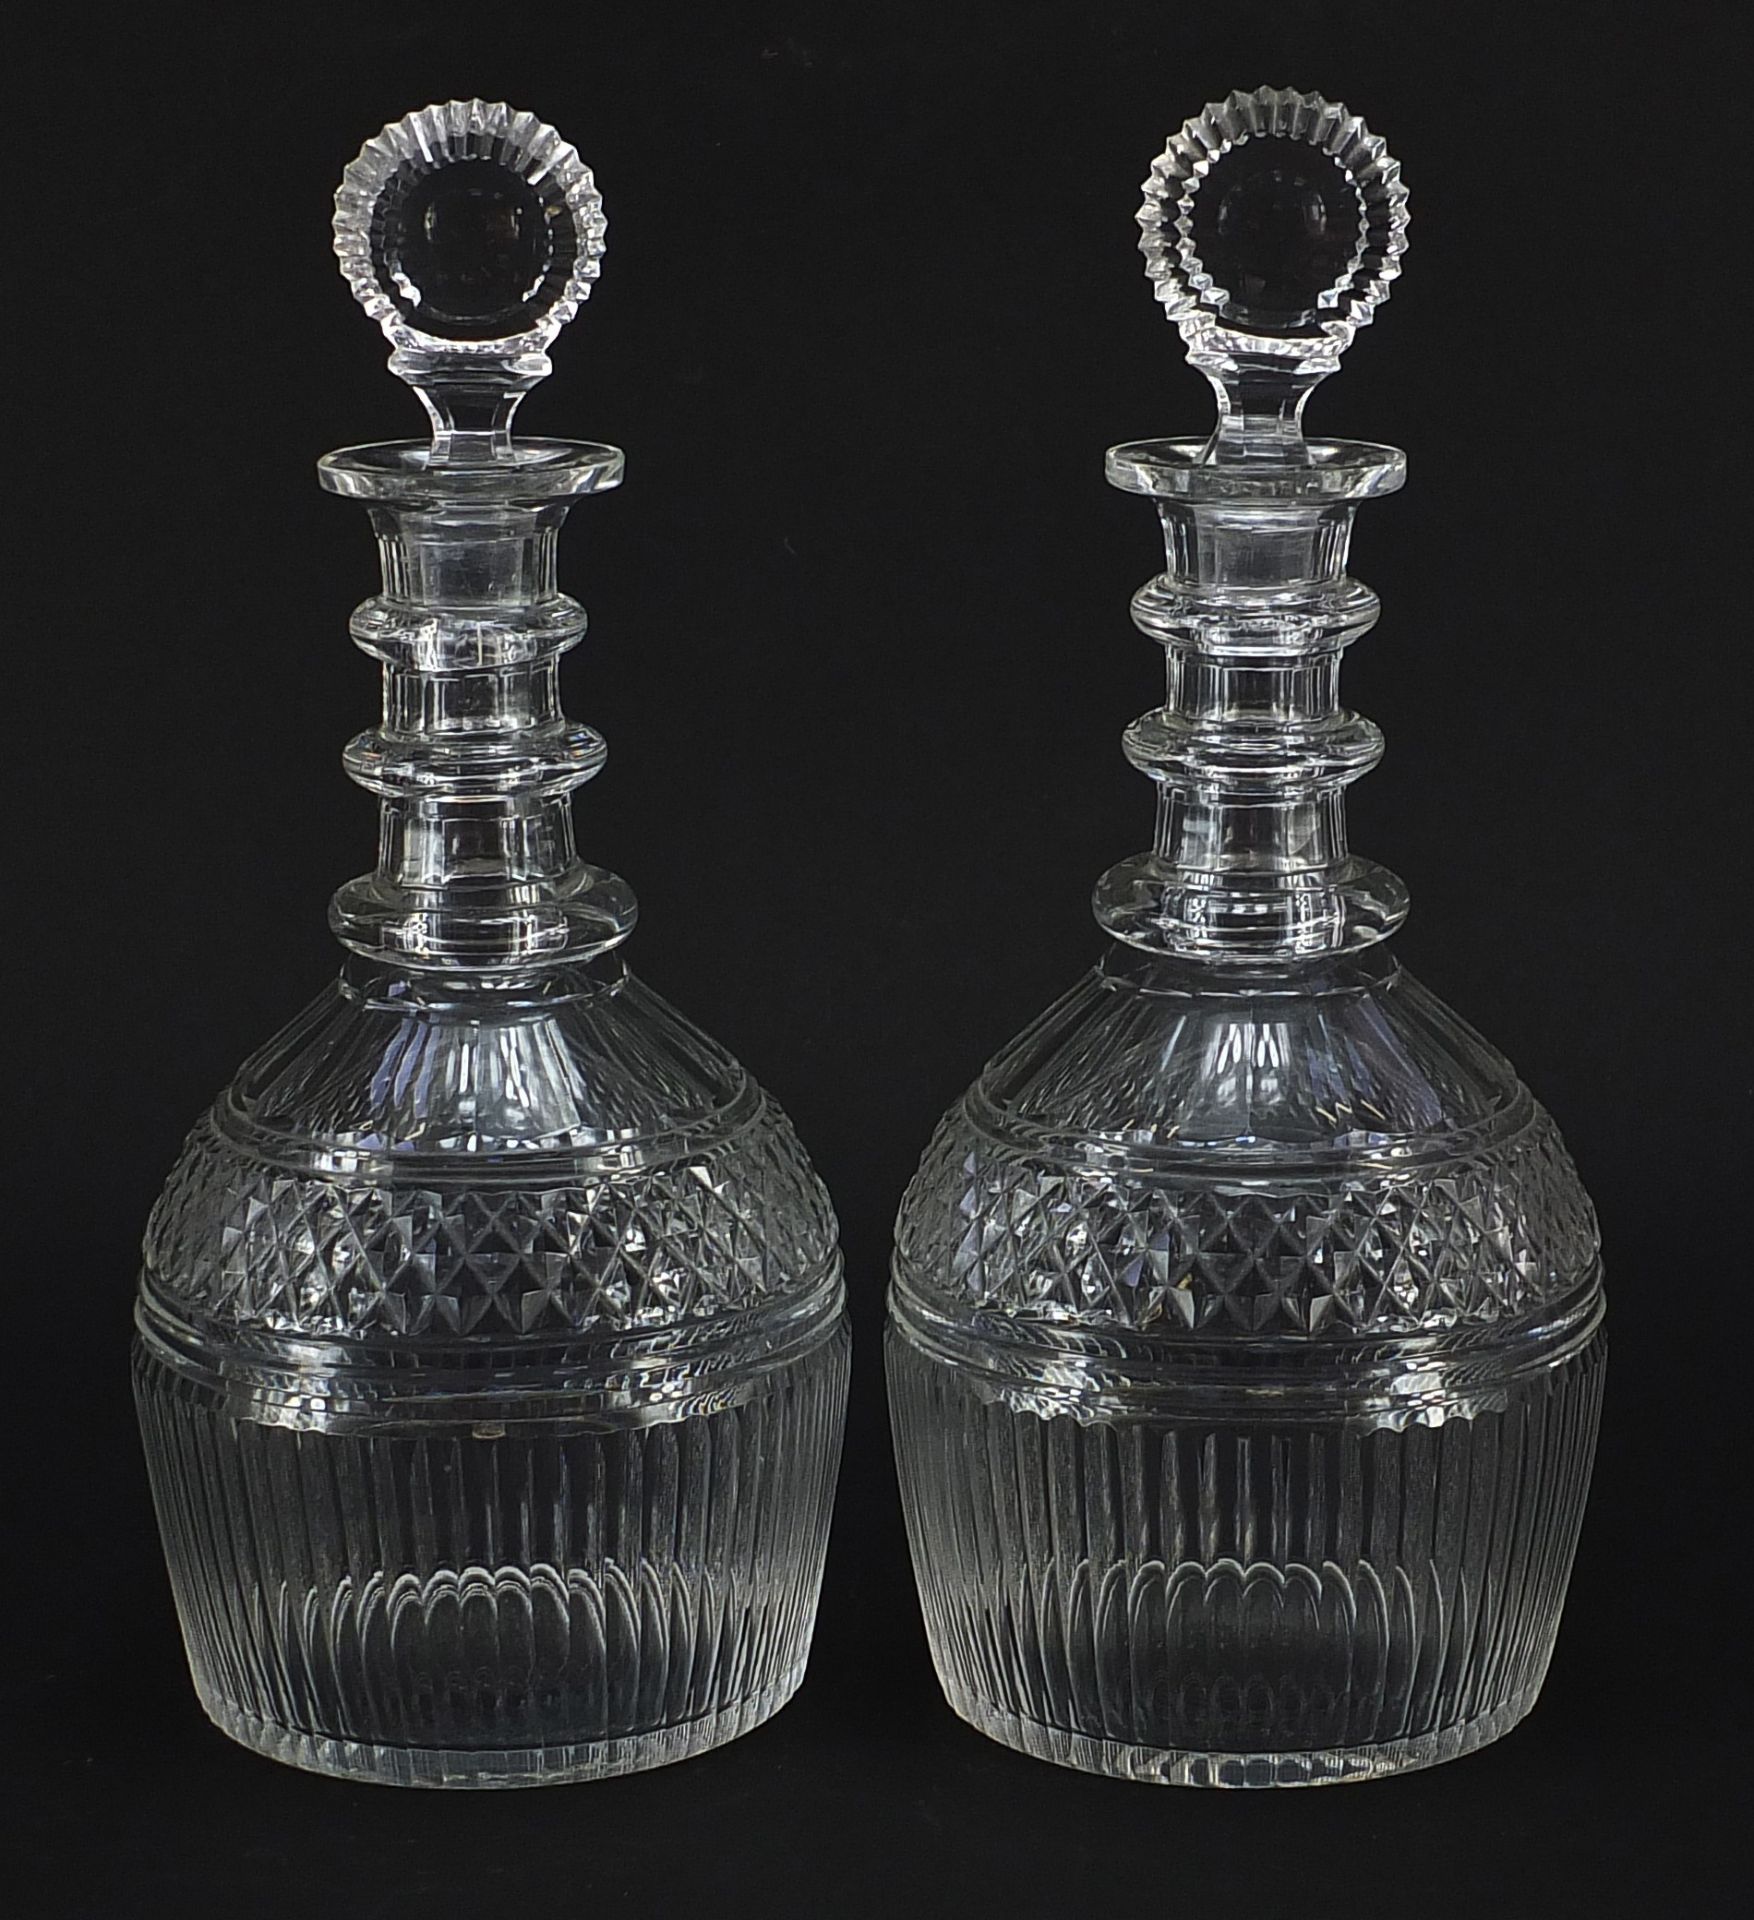 Pair of 18th century cut glass Prussian shape decanters with three rings with stoppers, each 28cm